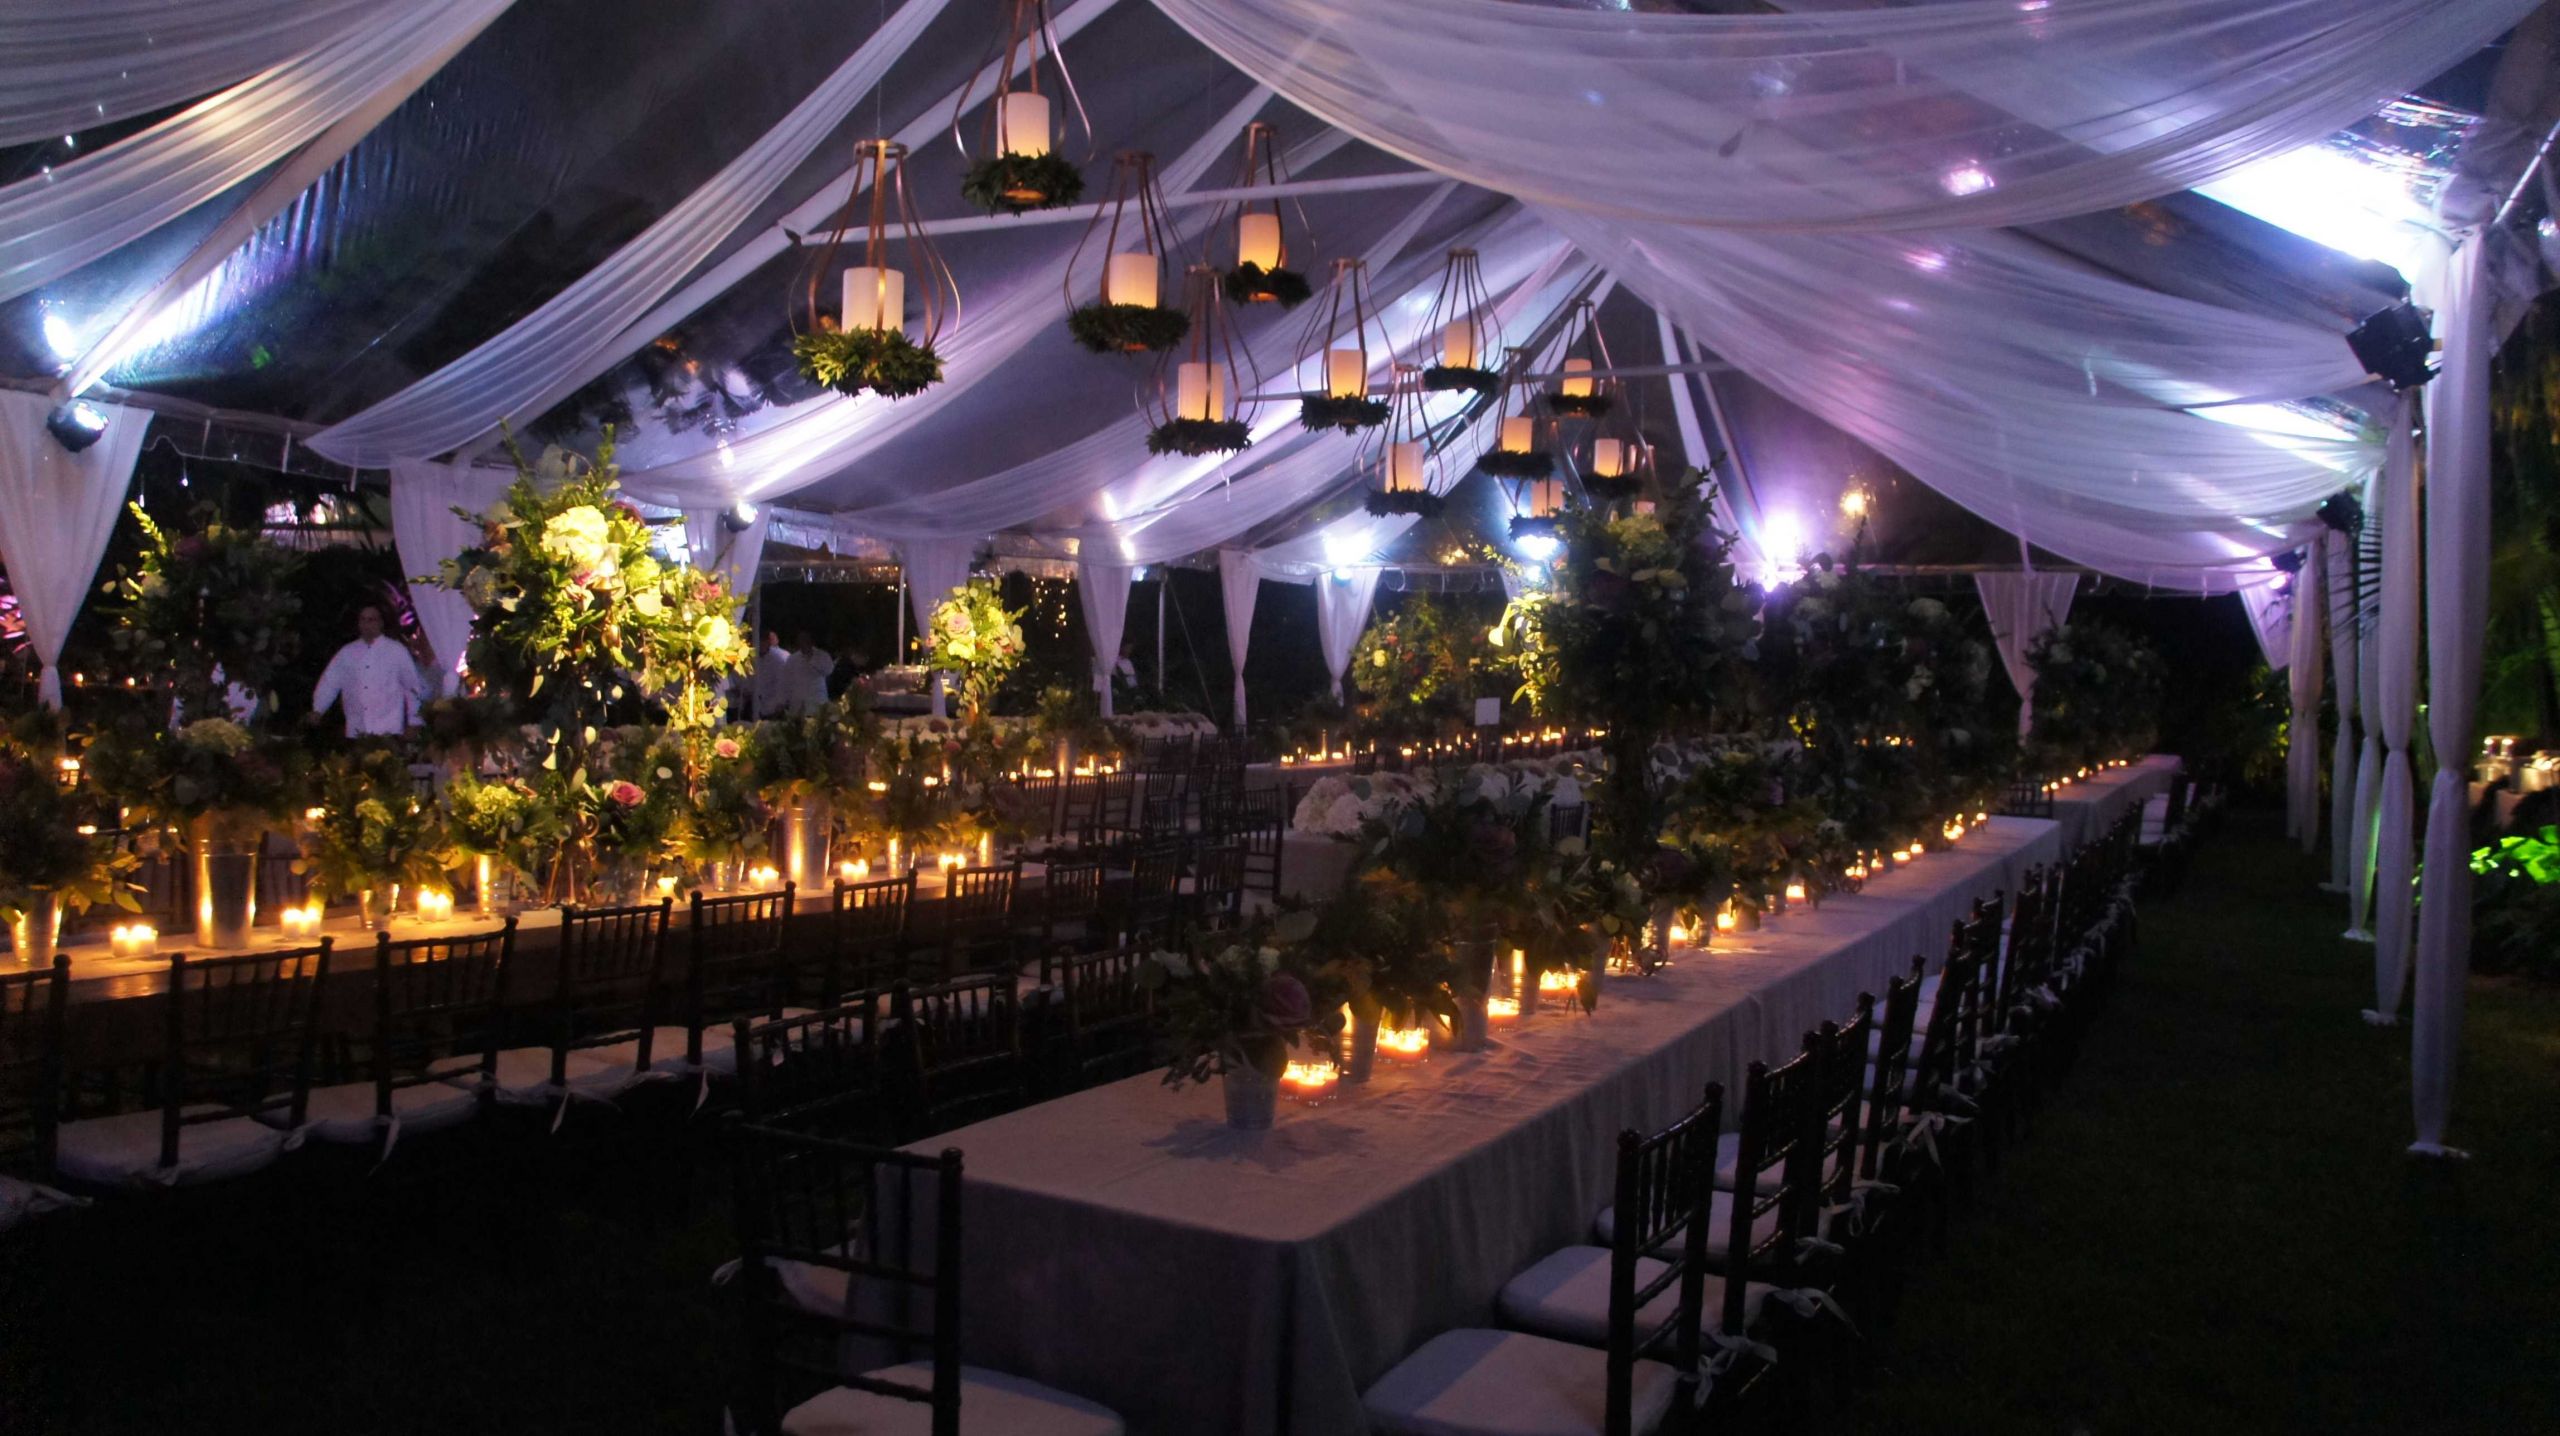 Lighting Ideas For Backyard Party
 9 Great Party Tent Lighting Ideas For Outdoor Events